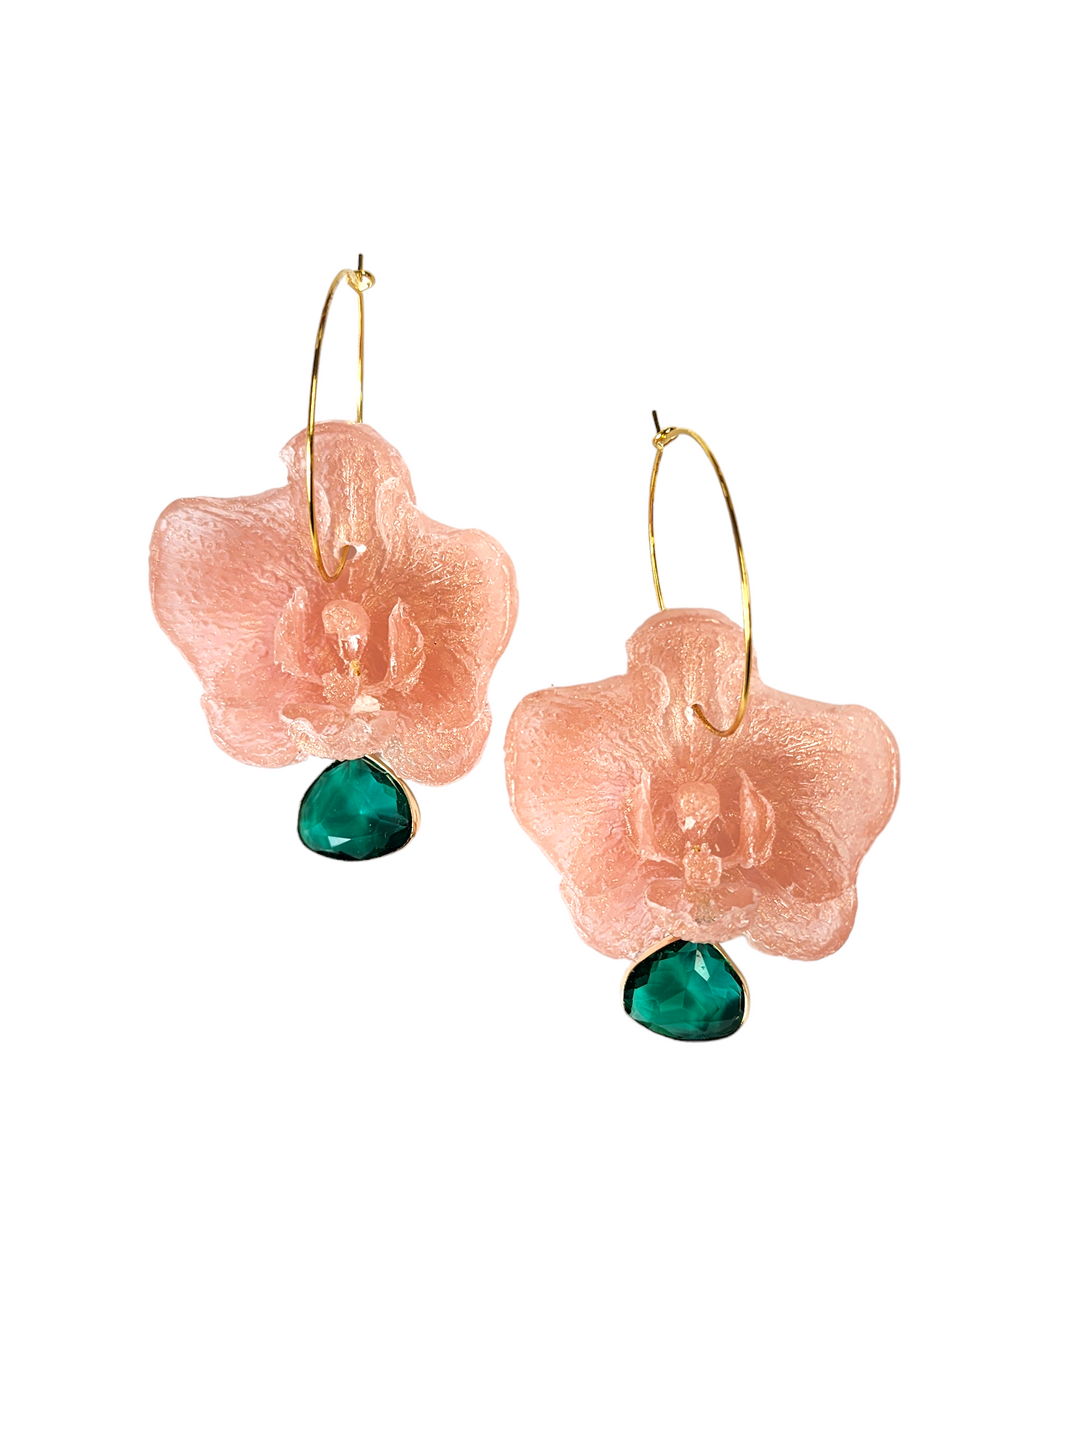 The Resin Gem Botanical Earring Collection